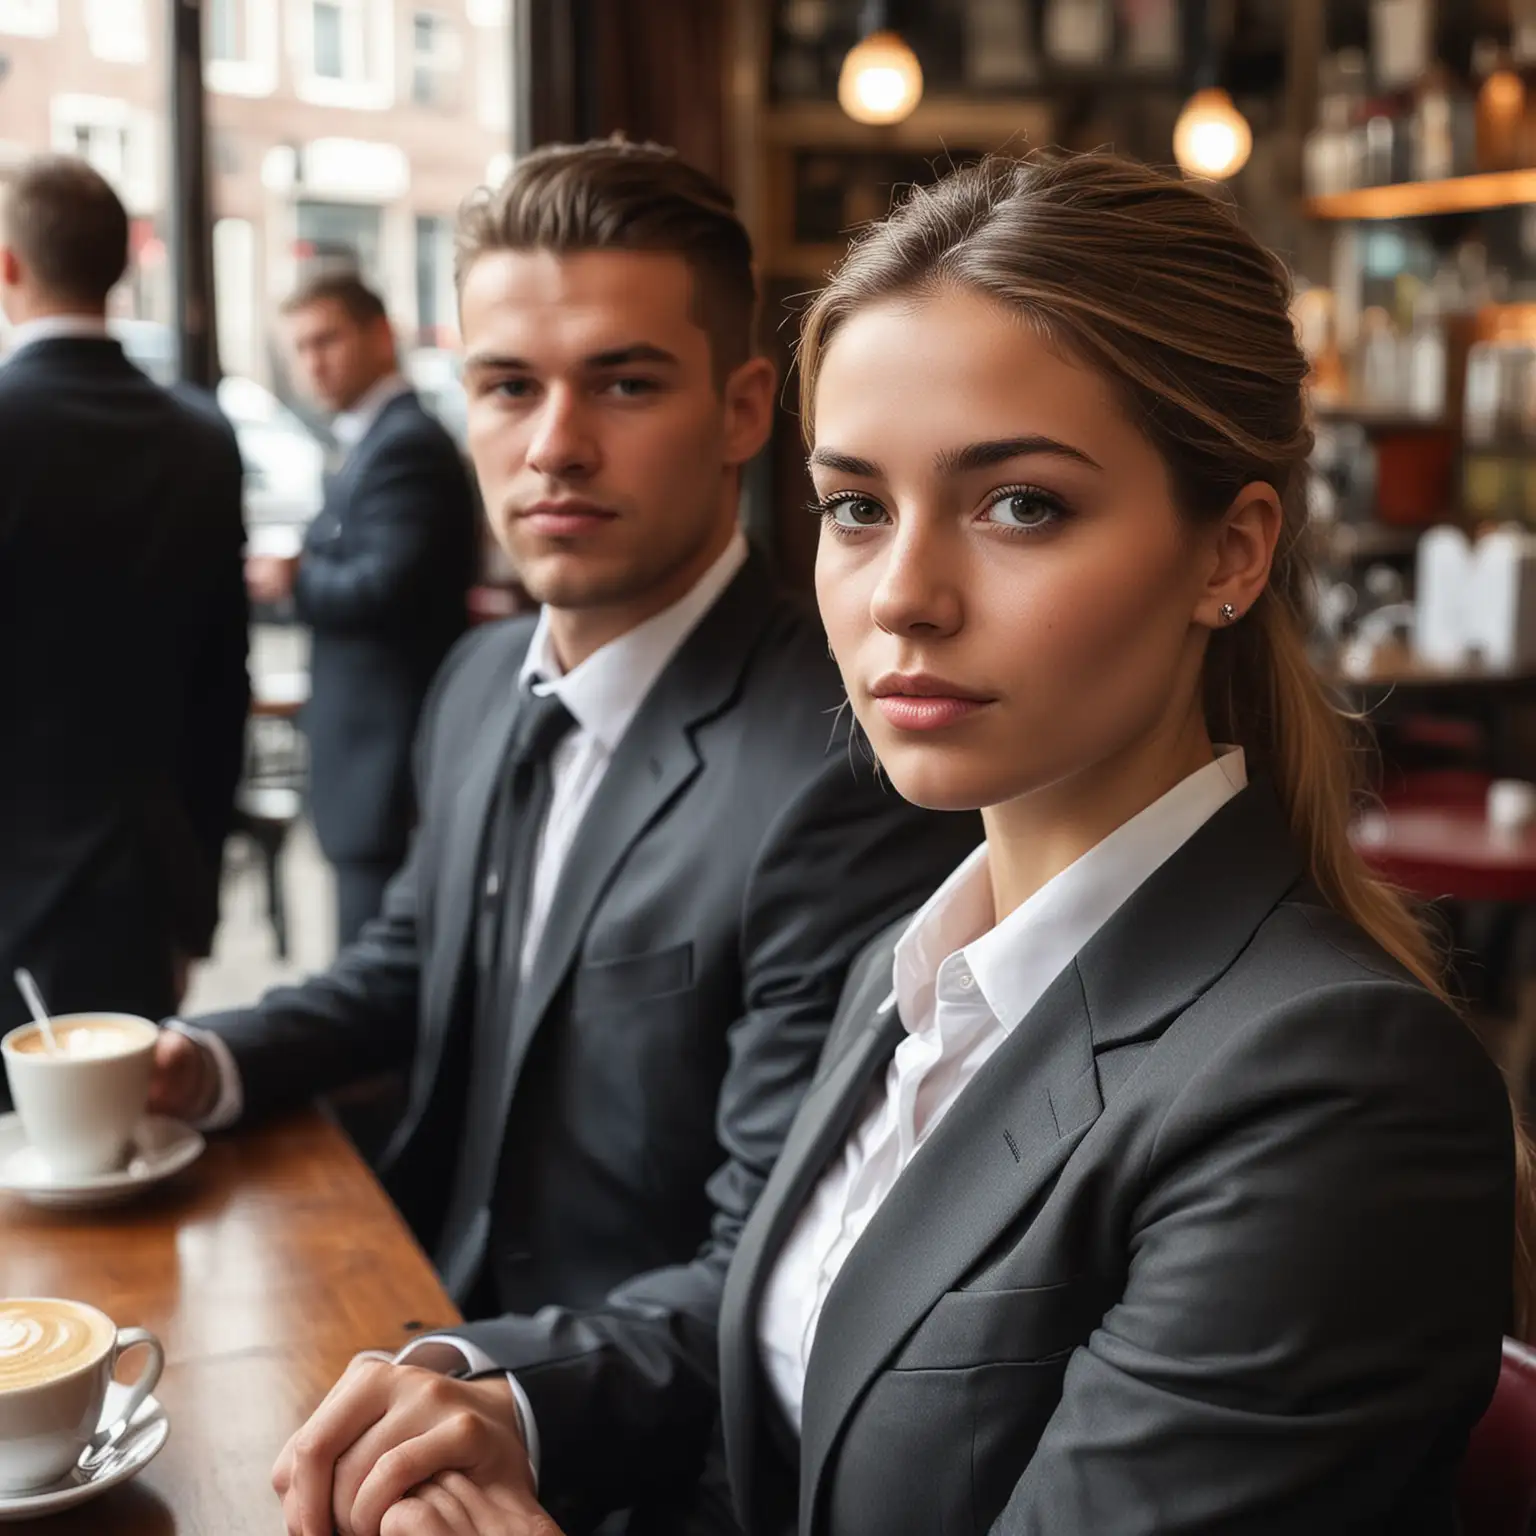 Young Businesswoman with Bodyguards in Amsterdam Cafe